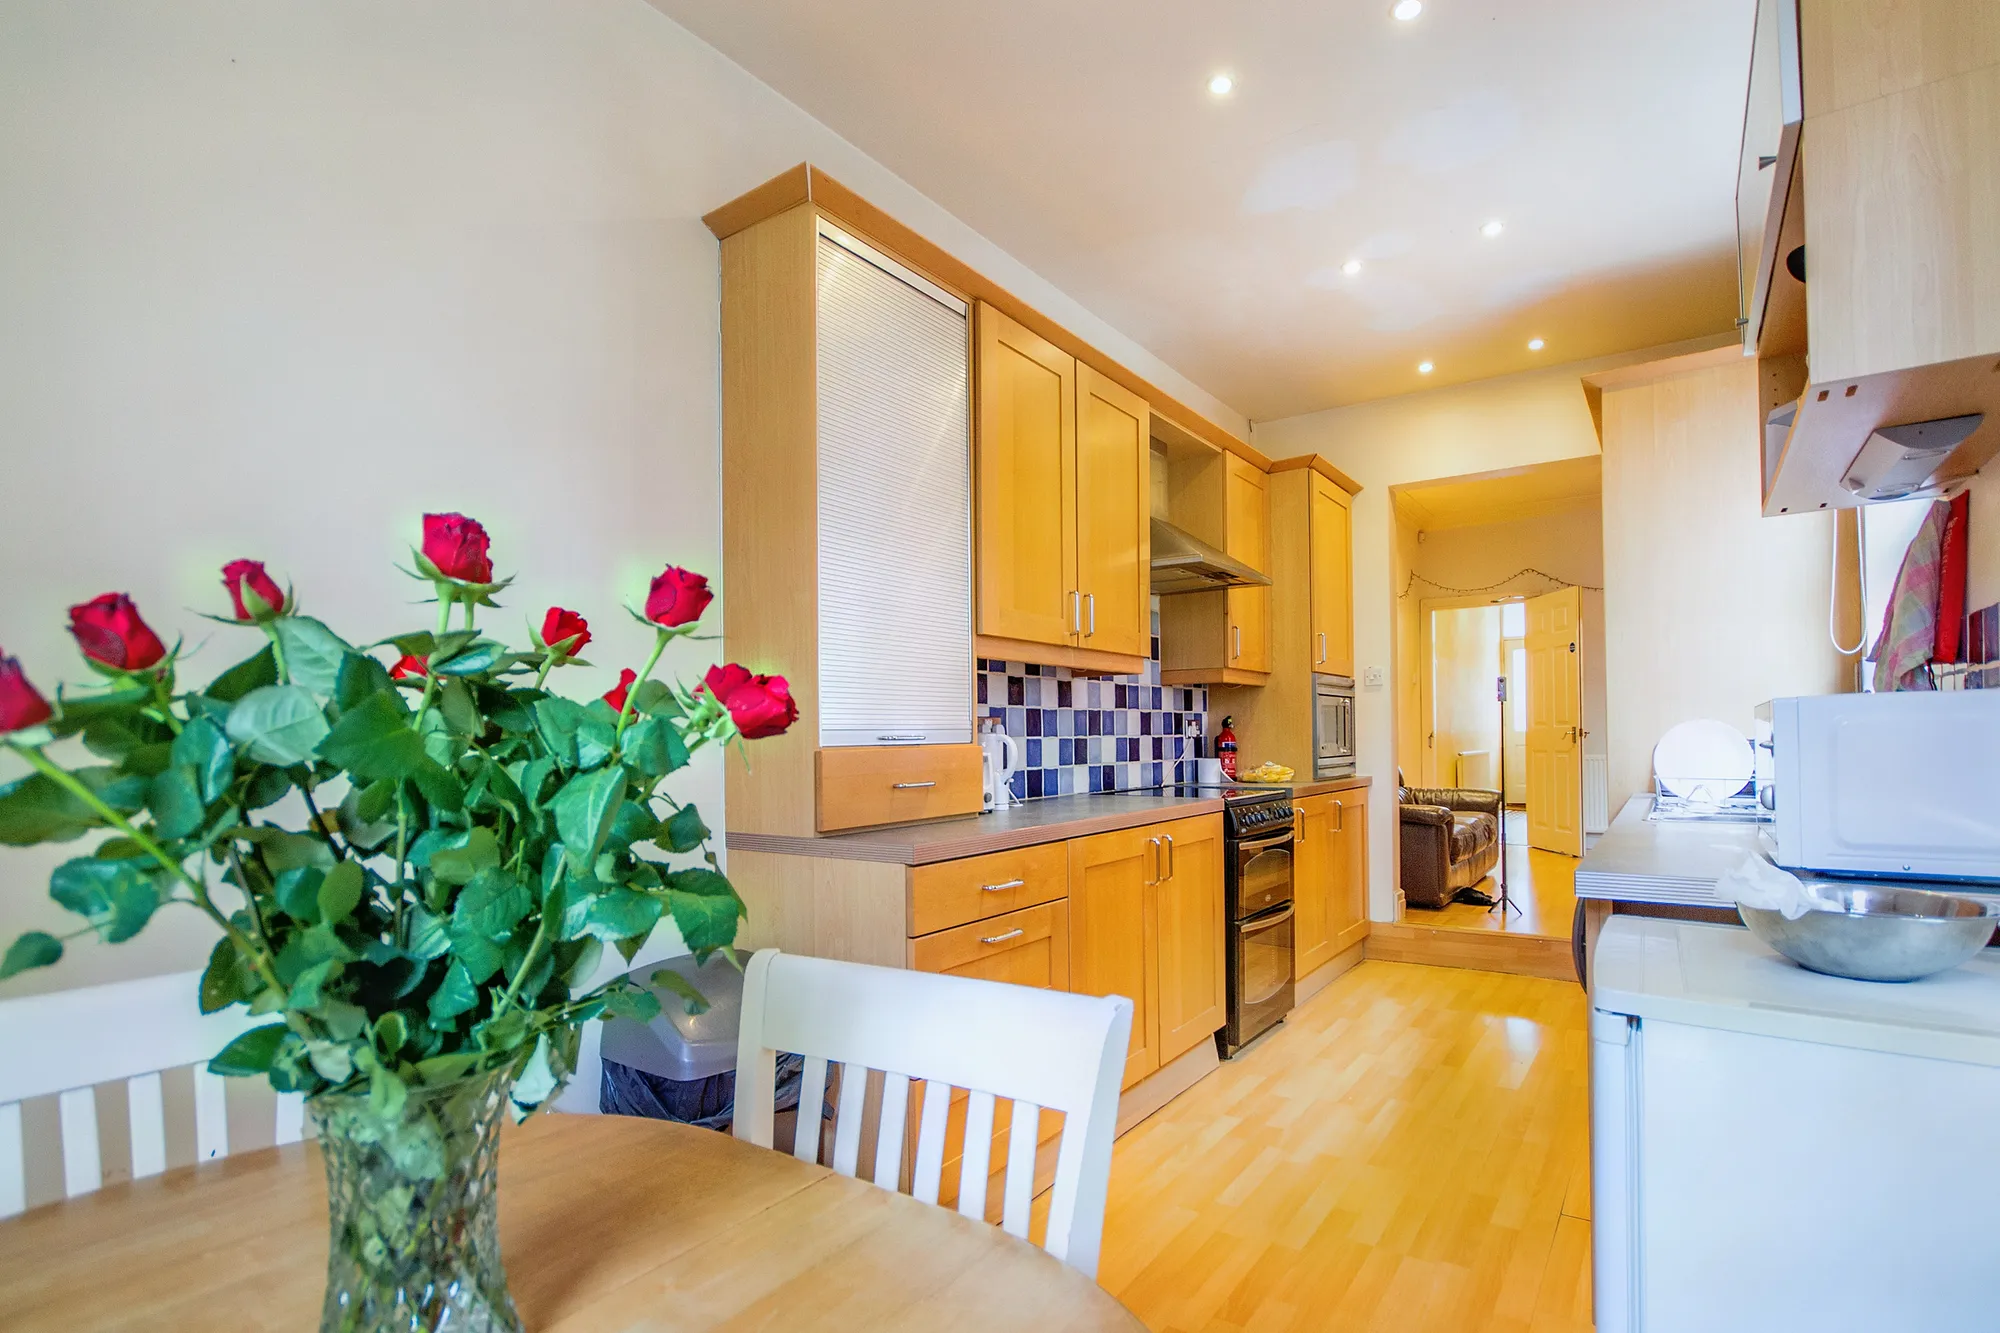 4 bed mid-terraced house to rent in Thurlow Road, Leicester - Property Image 1